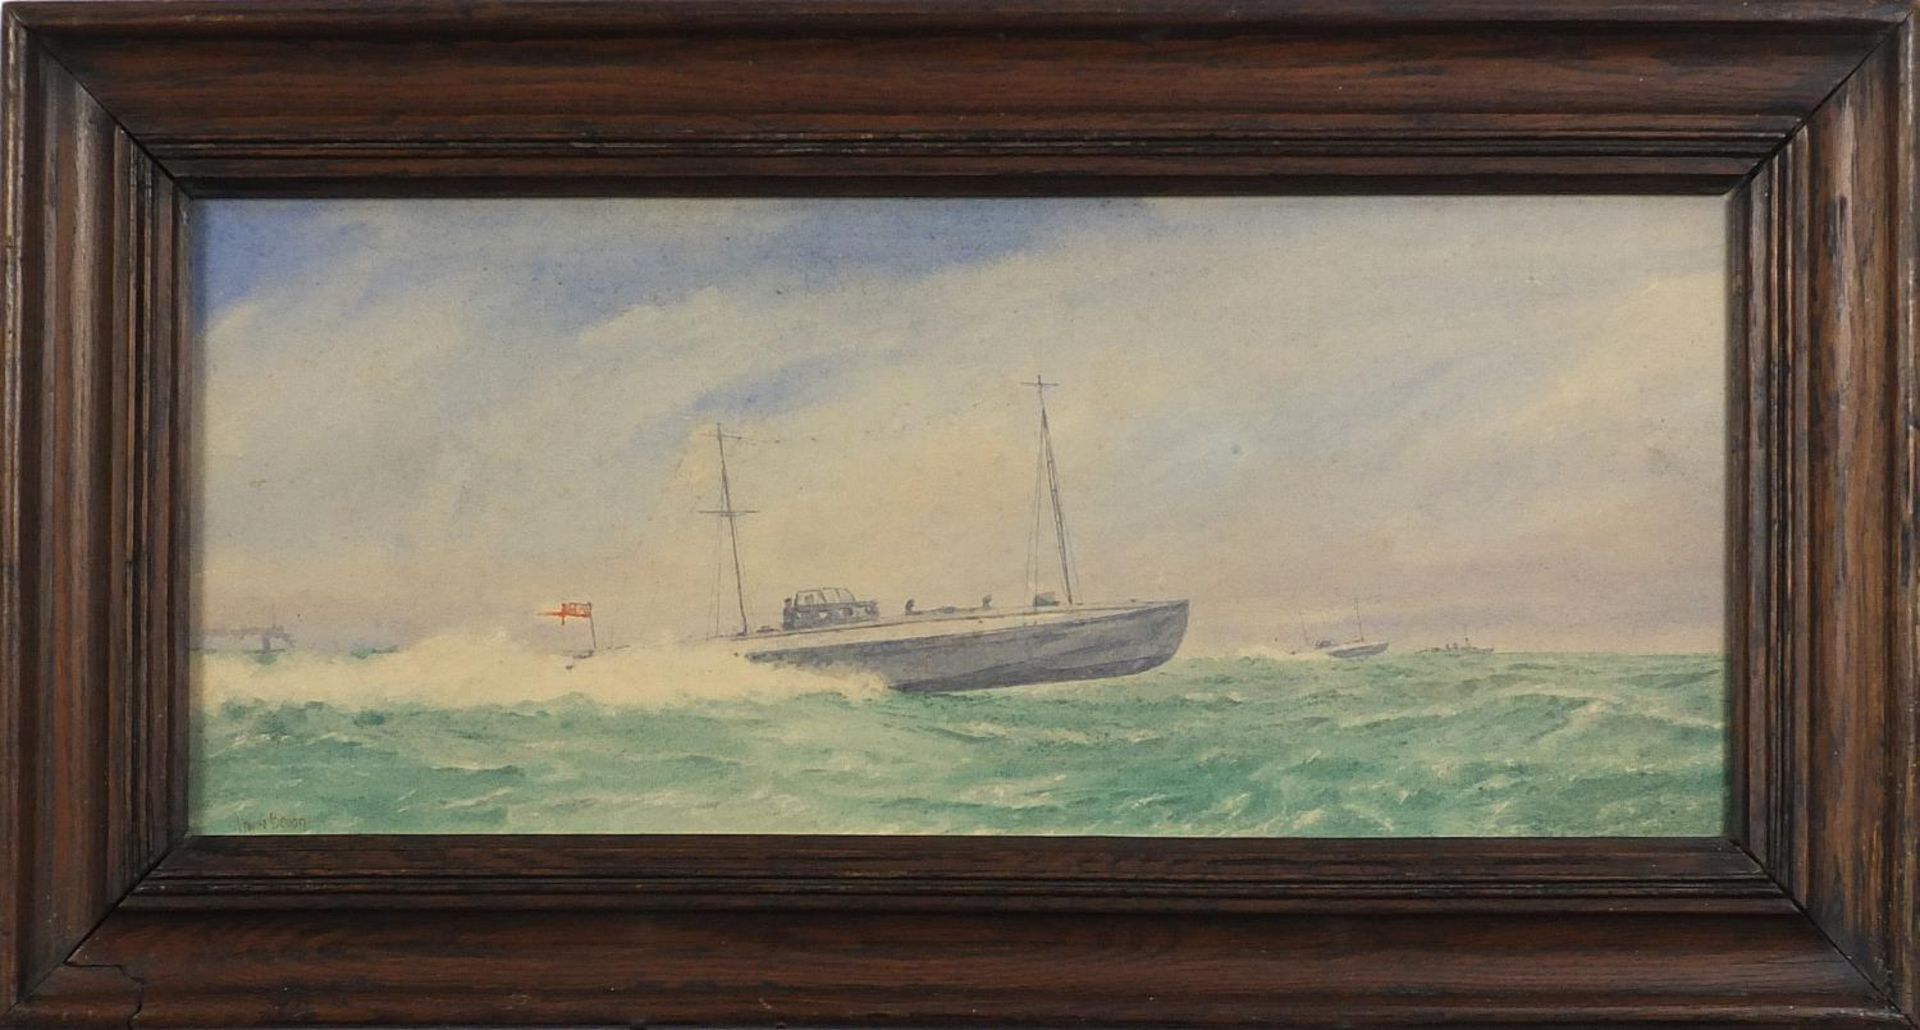 Irwin Bevan - Royal Navy boats in open sea, signed watercolour, framed and glazed, 48cm x 19.5cm - Image 2 of 4